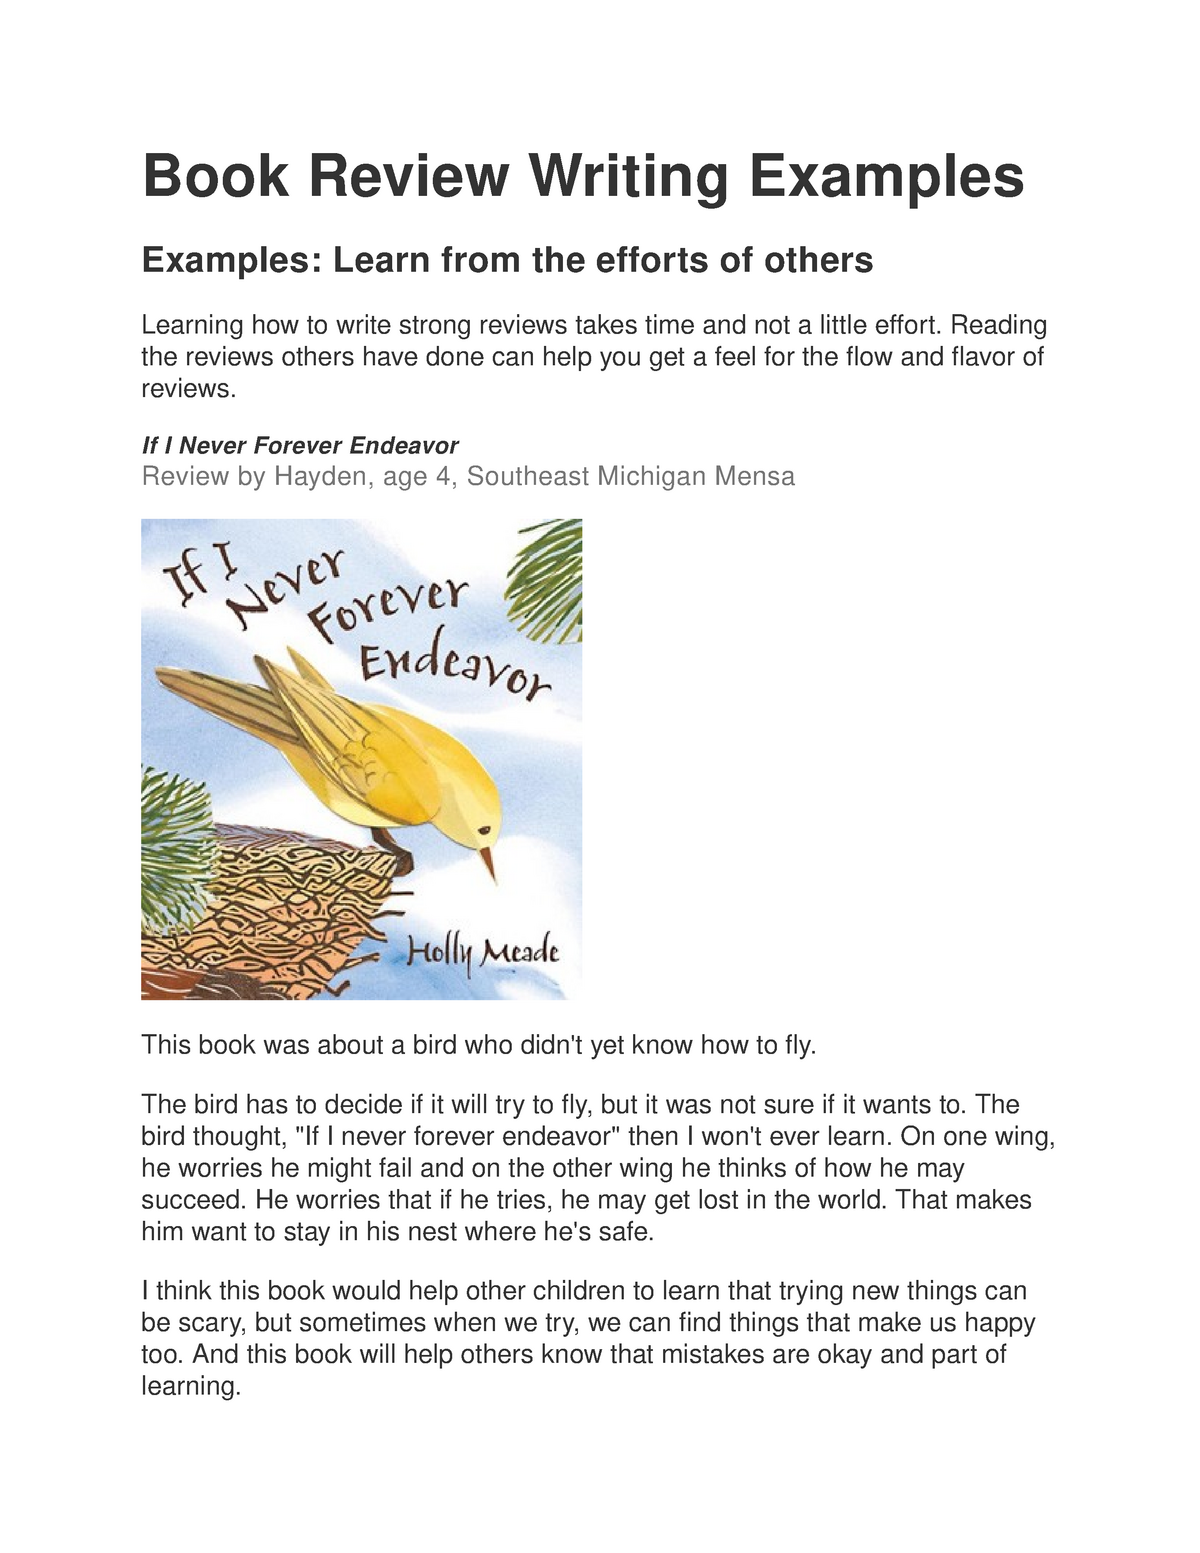 book-review-writing-examples-book-revi-ew-wr-iting-exampl-es-examples